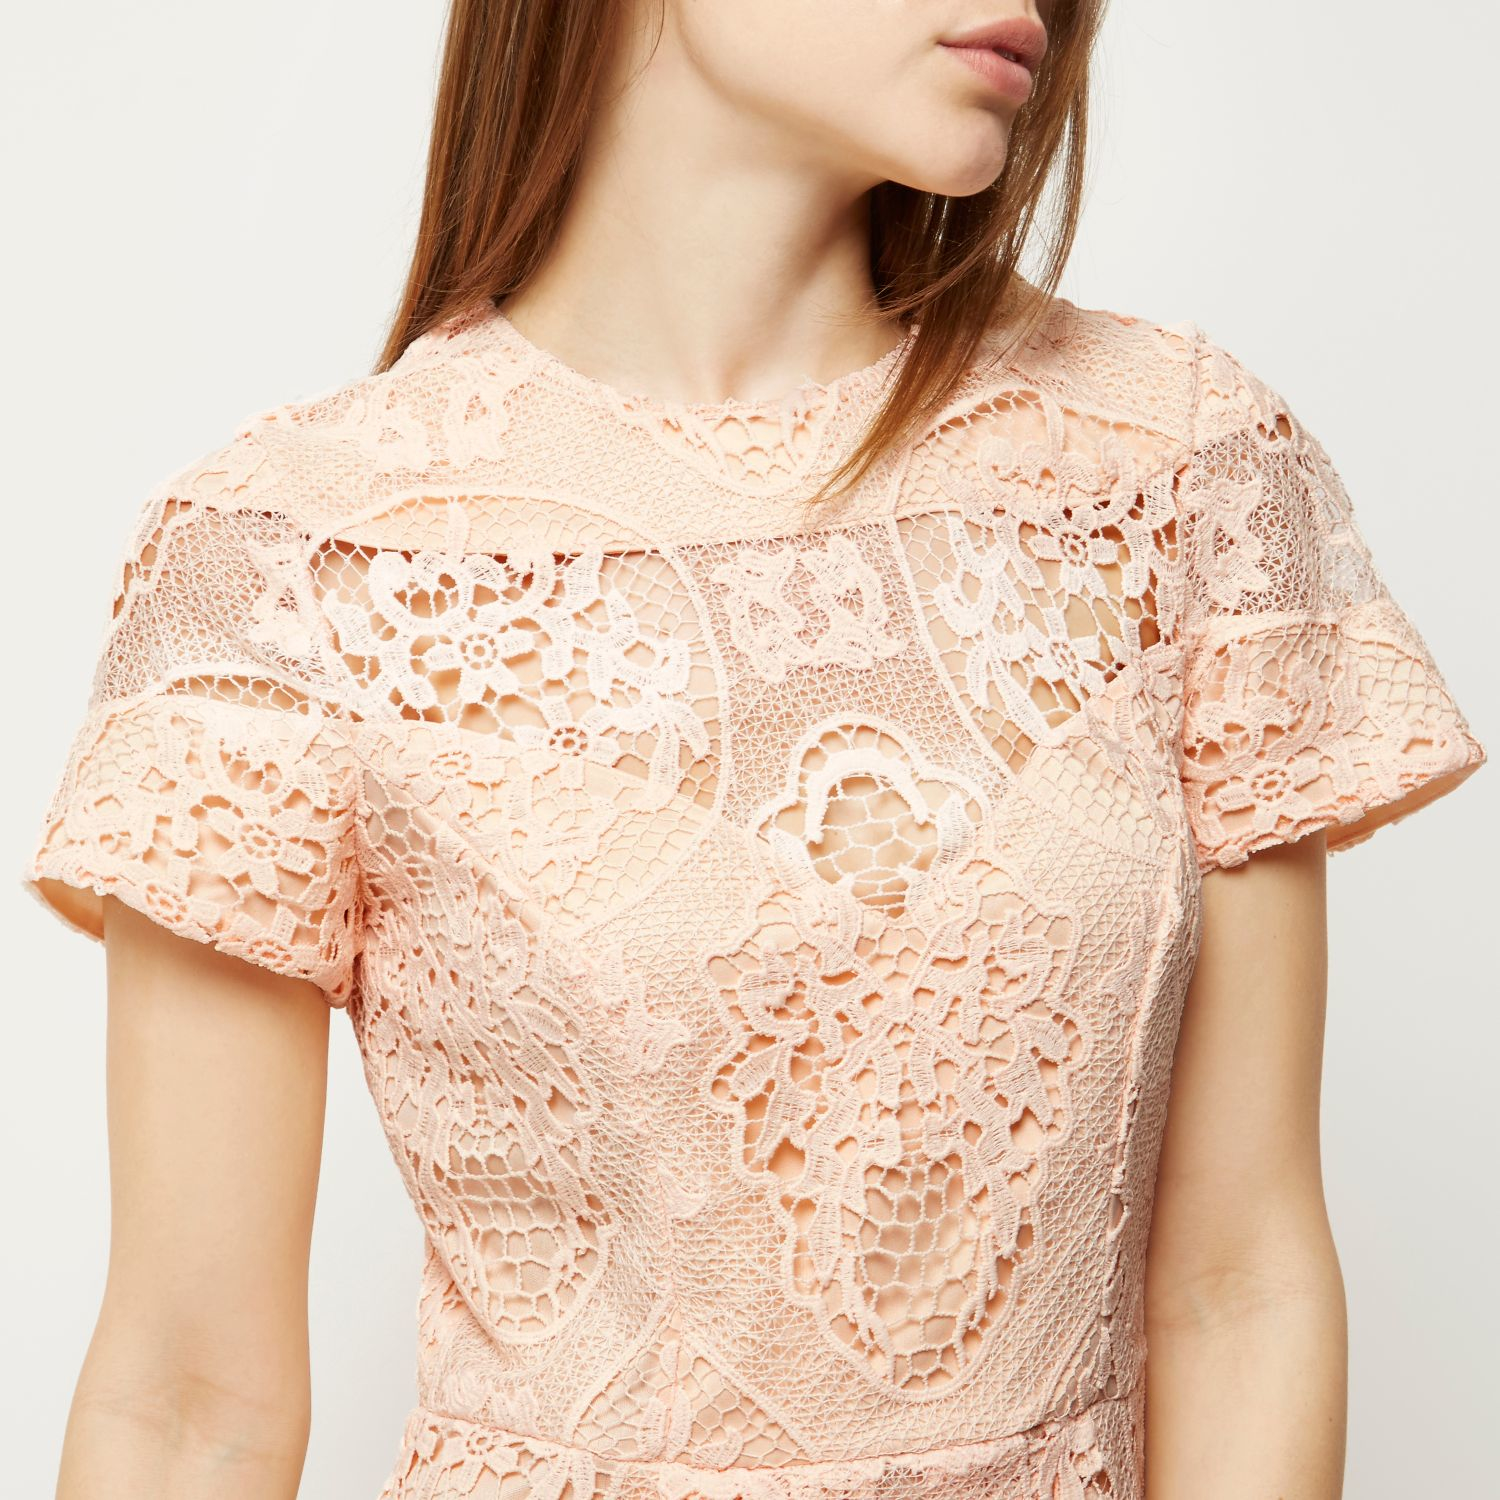 River Island Pink Lace Dress & Overview 2017